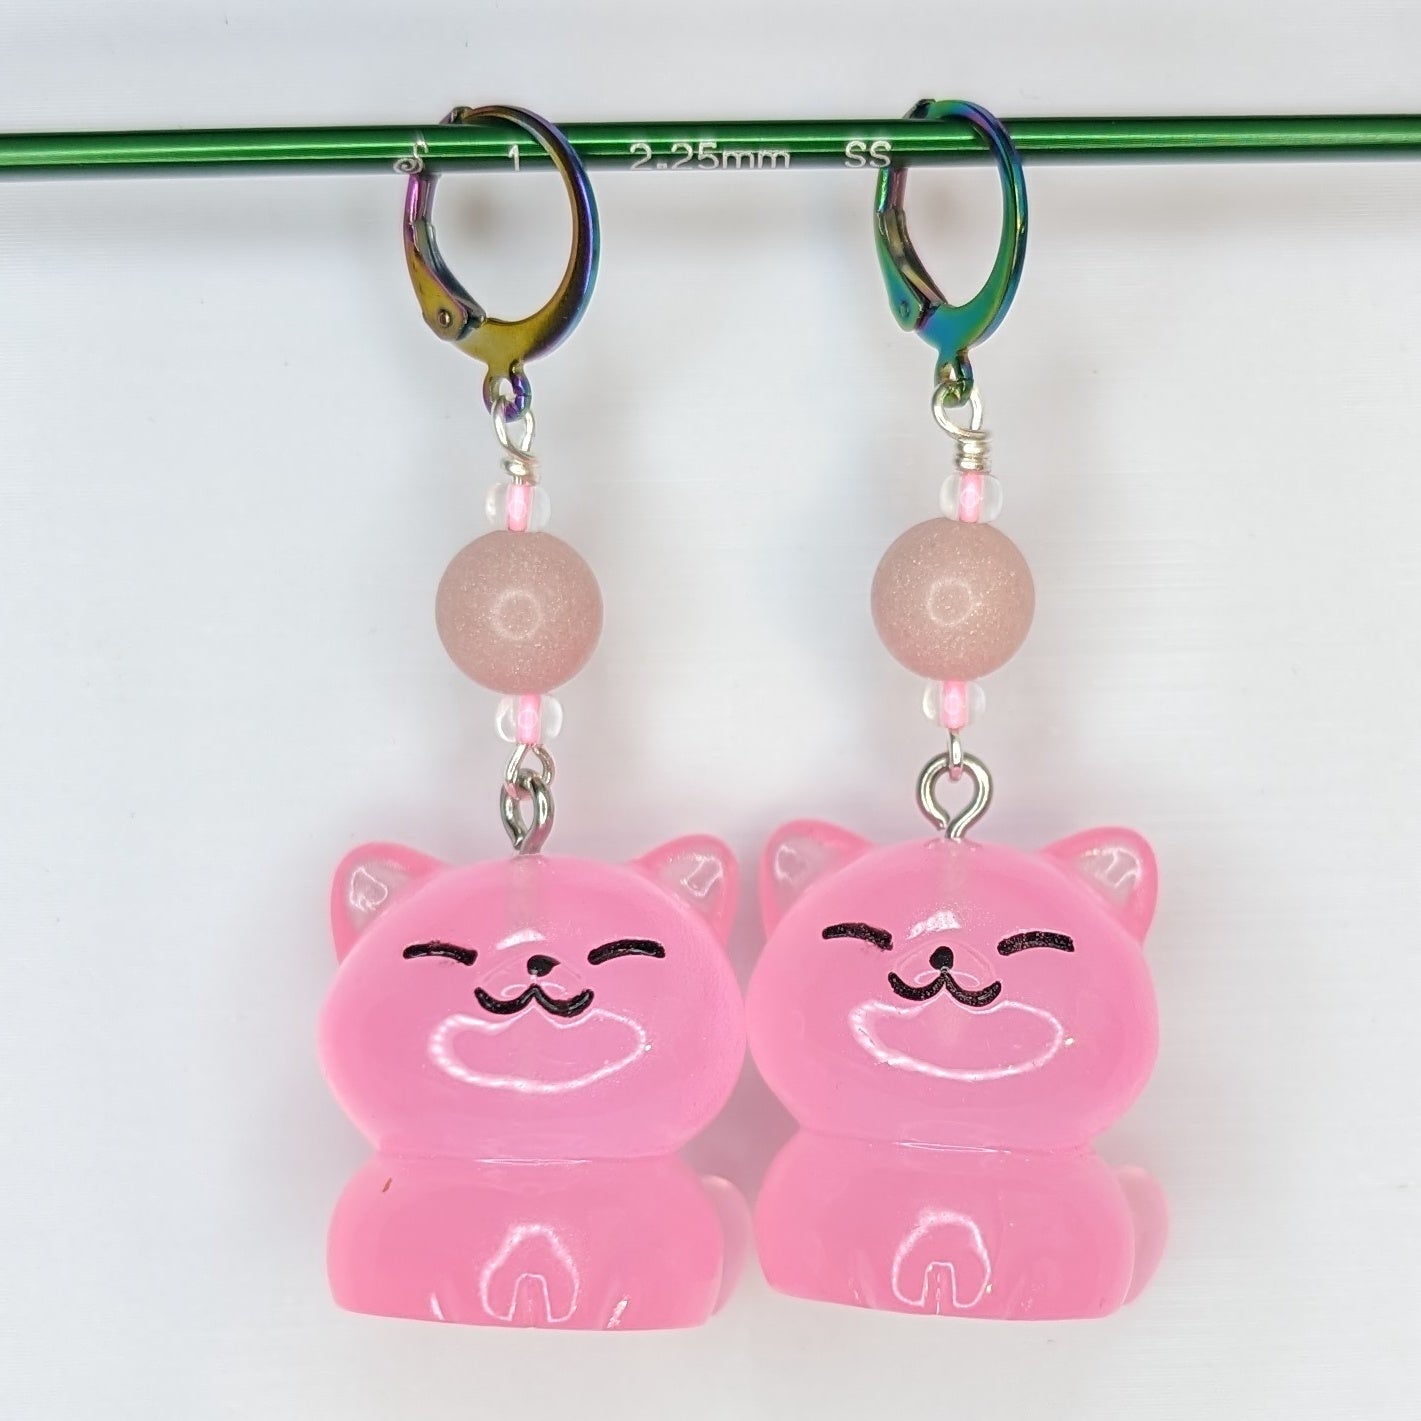 Resin Cat (Glow in the Dark) Earrings & Stitch Markers (Large)